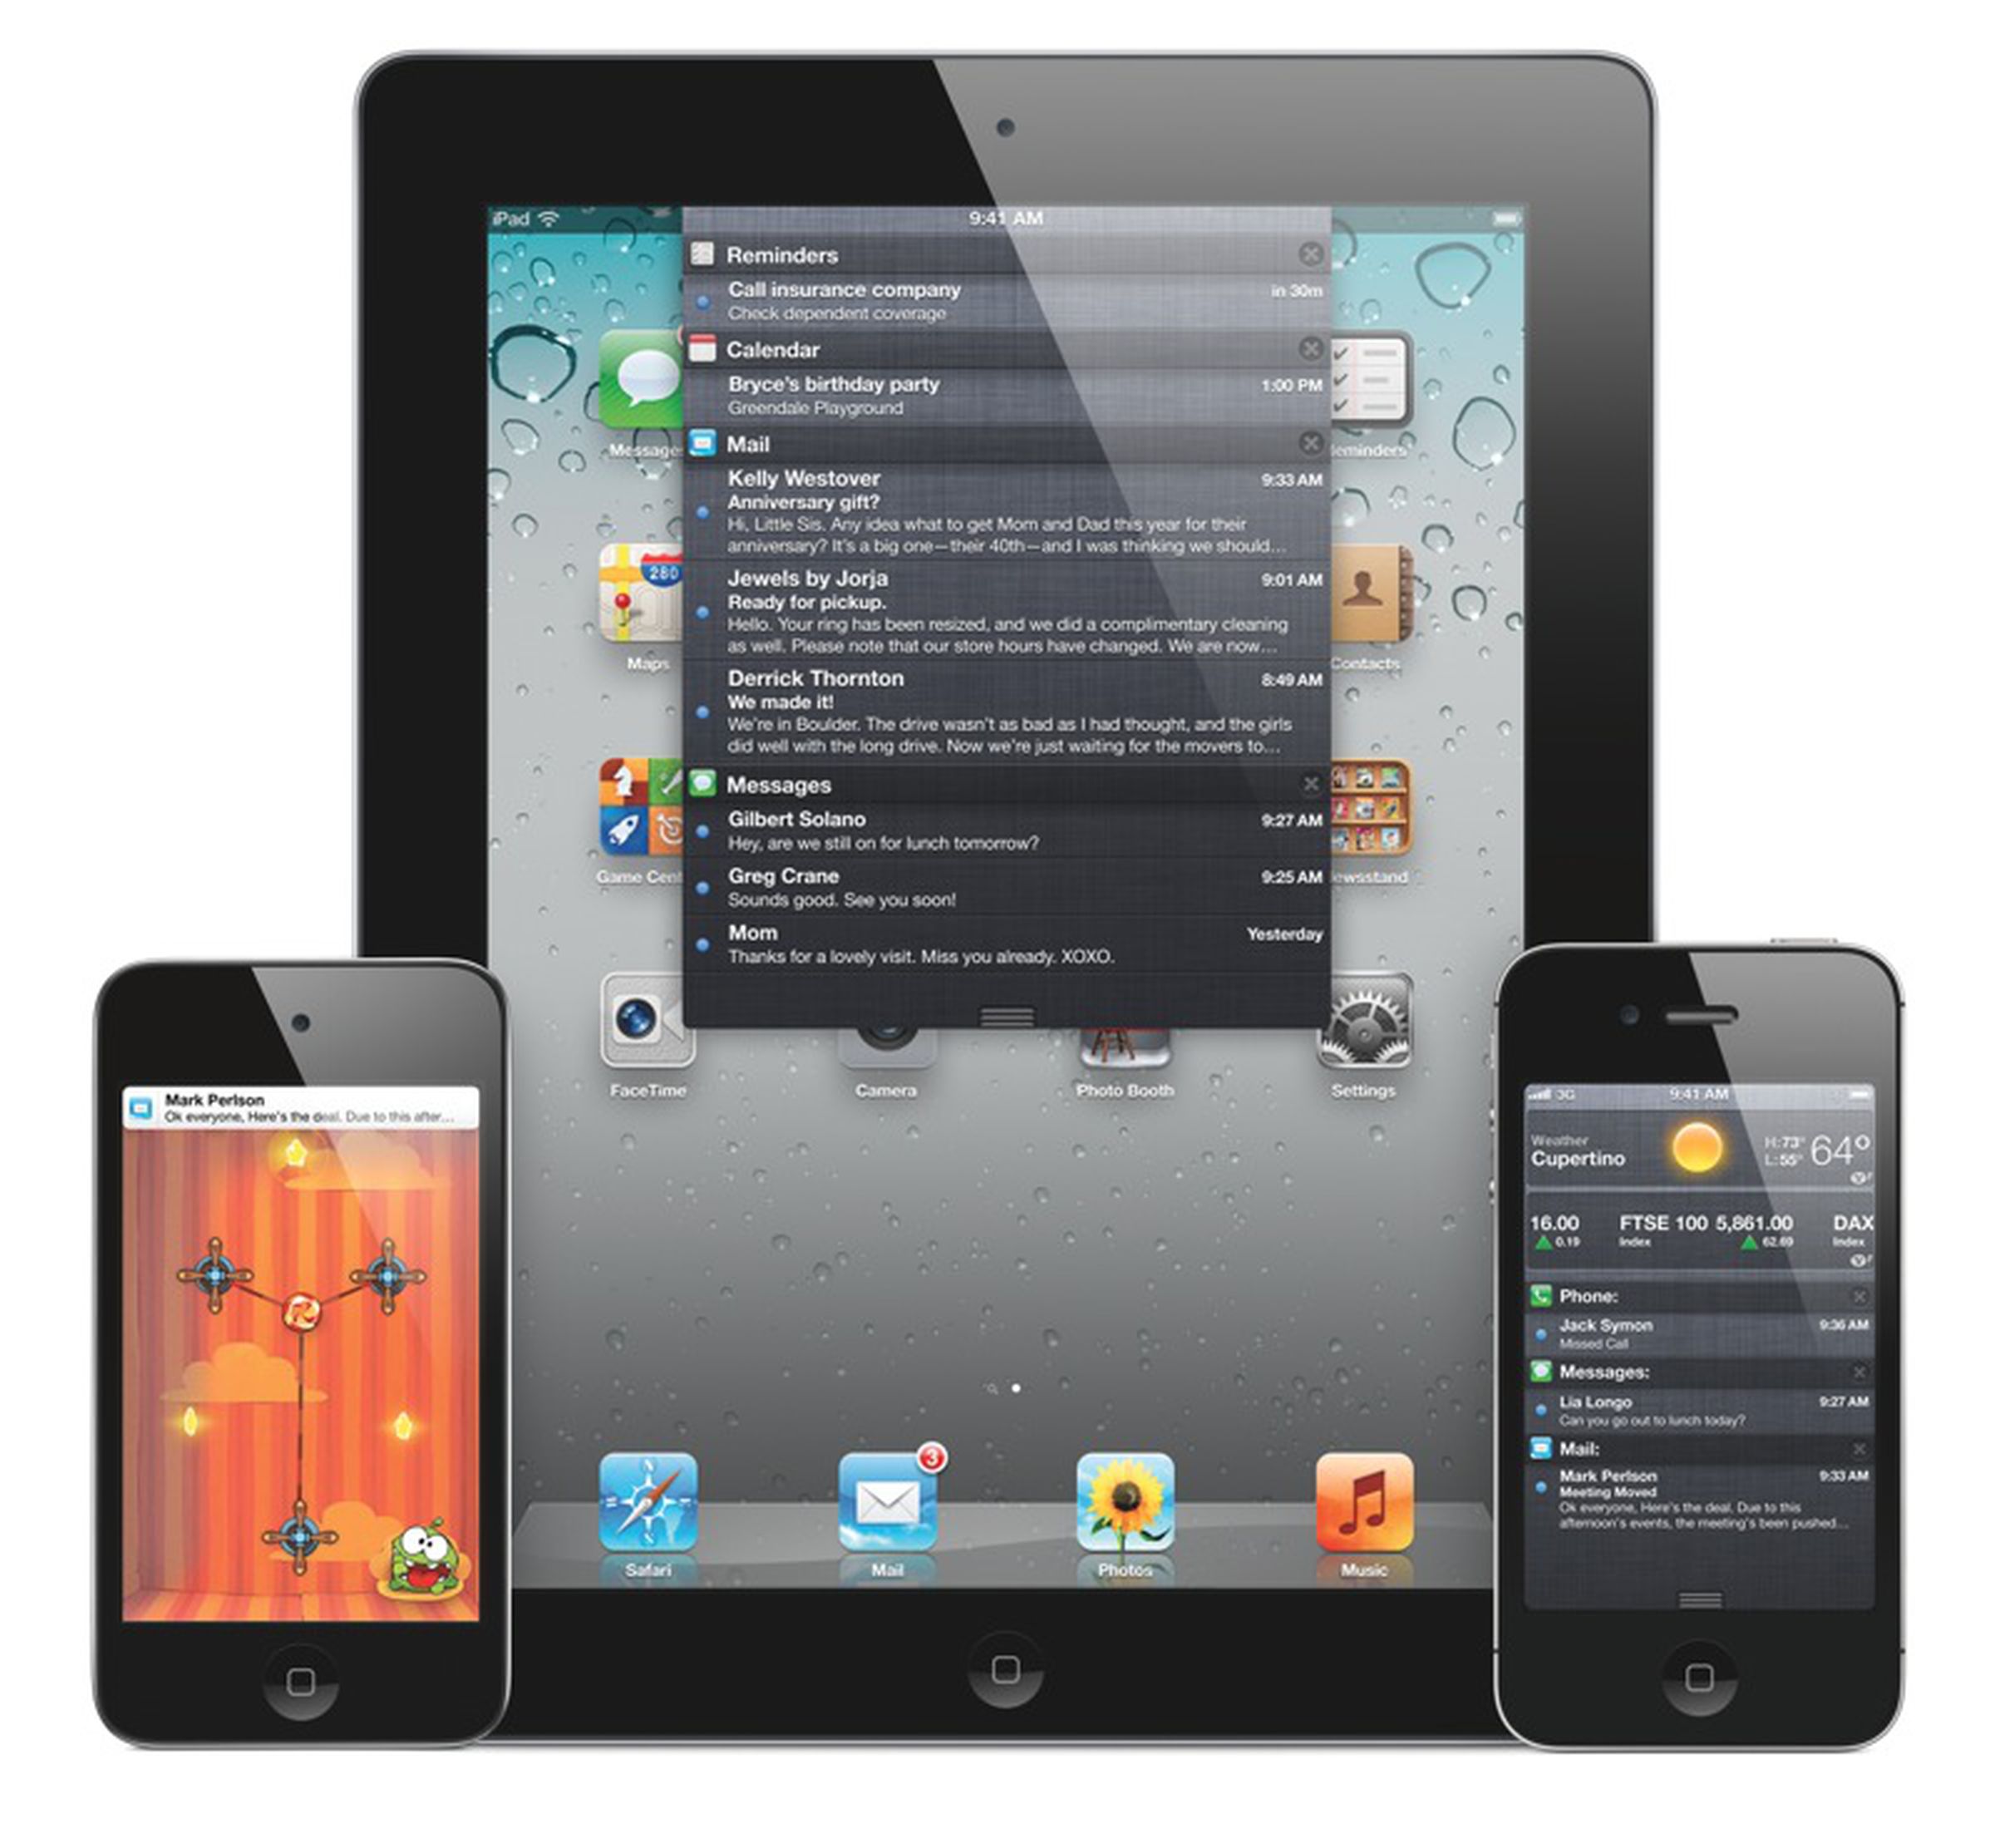 iOS 5 rolls out to all on October 12th